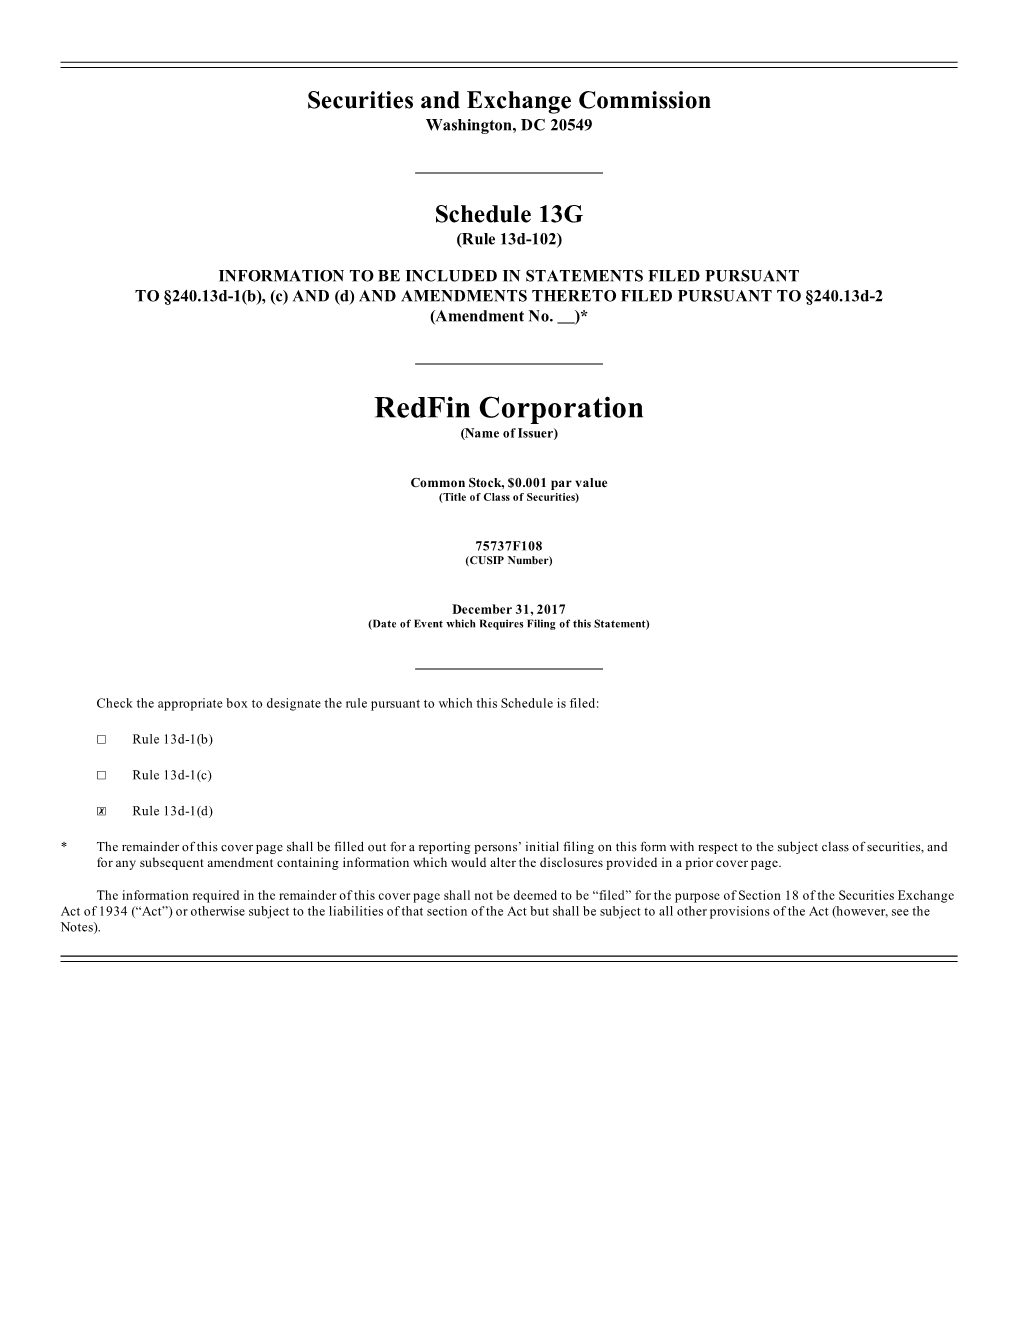 Redfin Corporation (Name of Issuer)